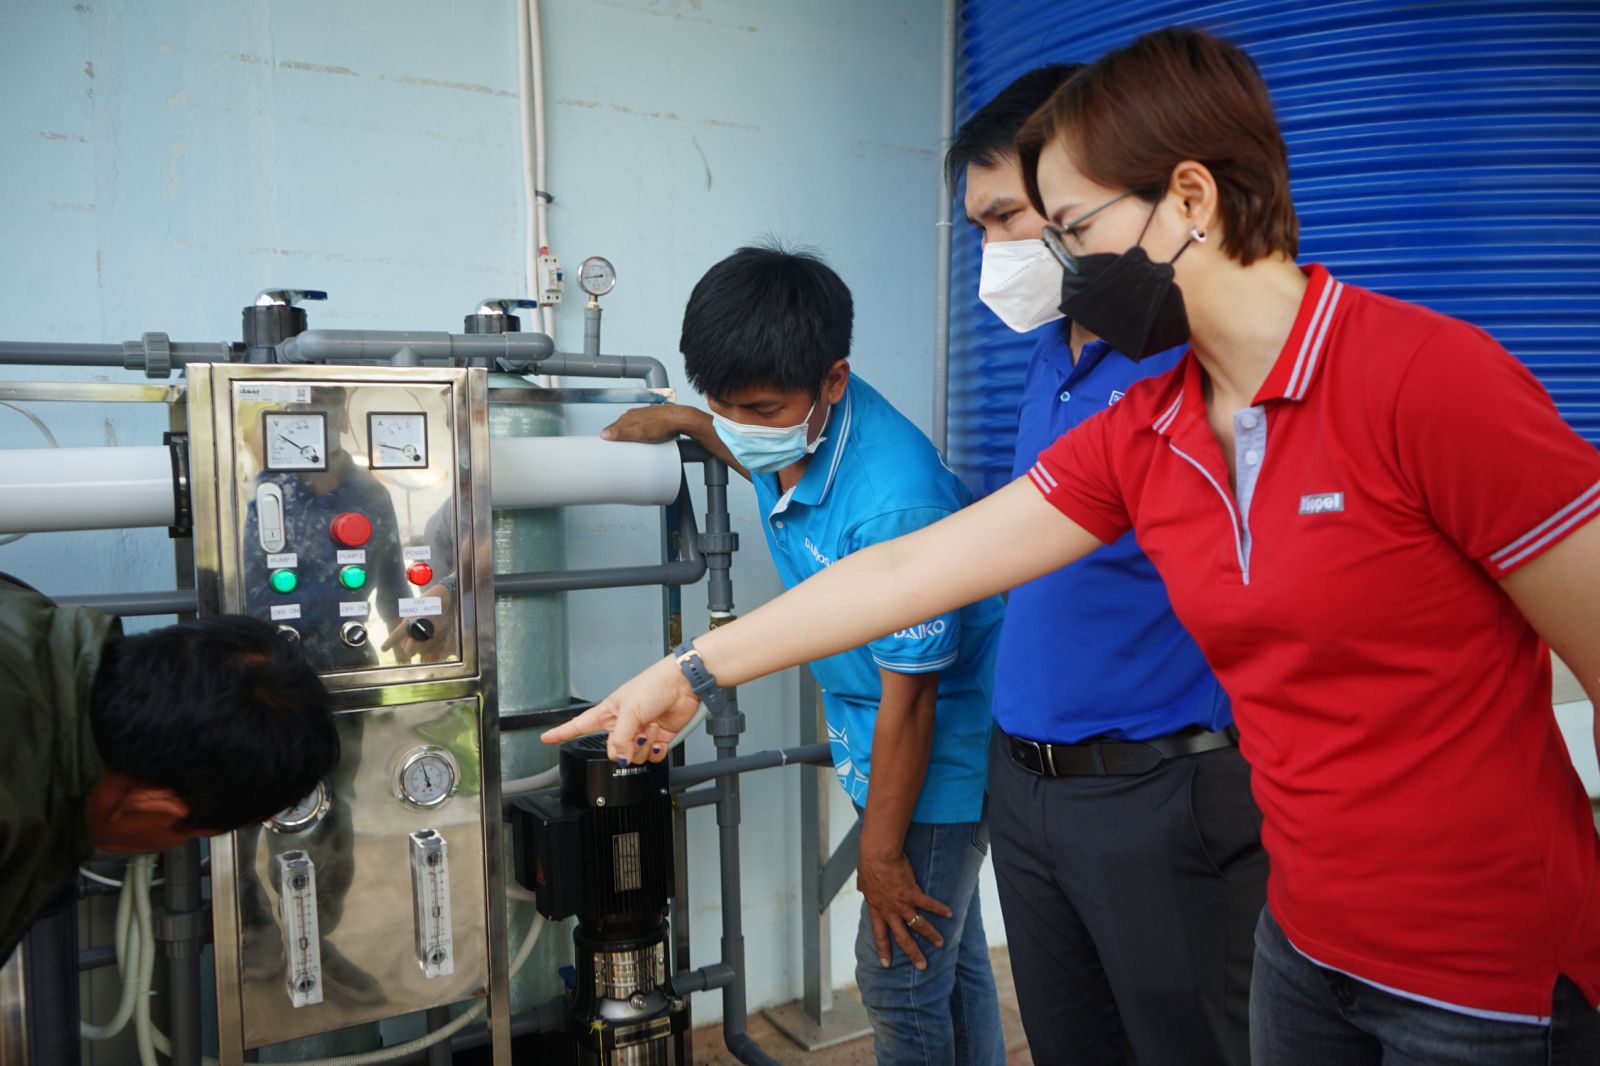 Keppel Land to provide clean water in drought-stricken Ben Tre with the Living Well initiative